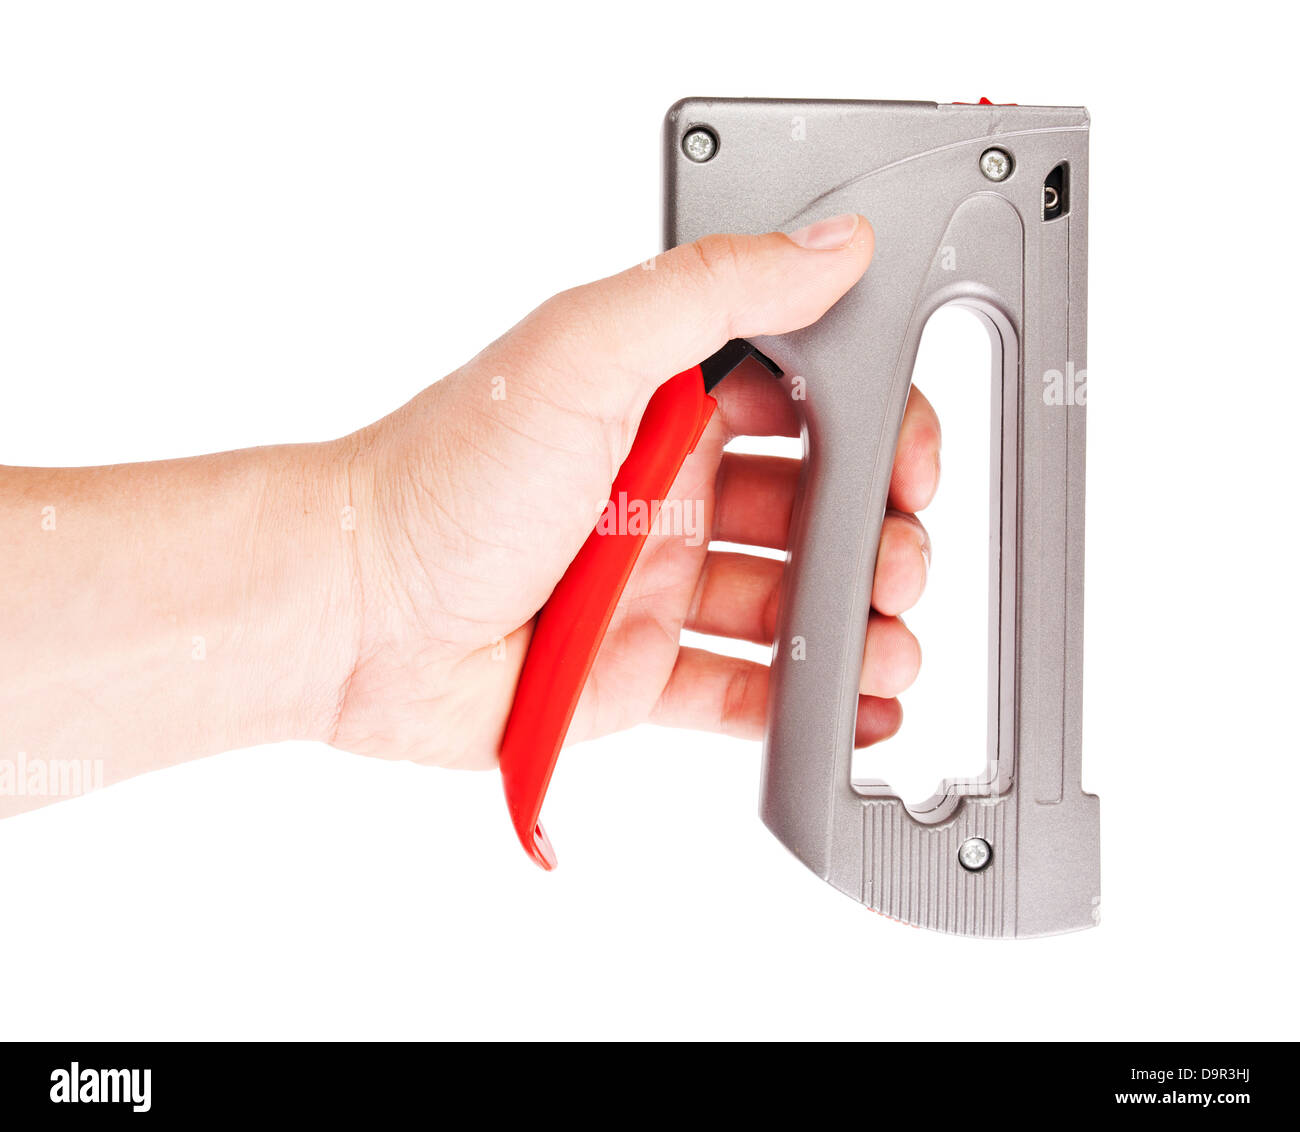 Professional staple gun in the hand isolated over white background Stock Photo